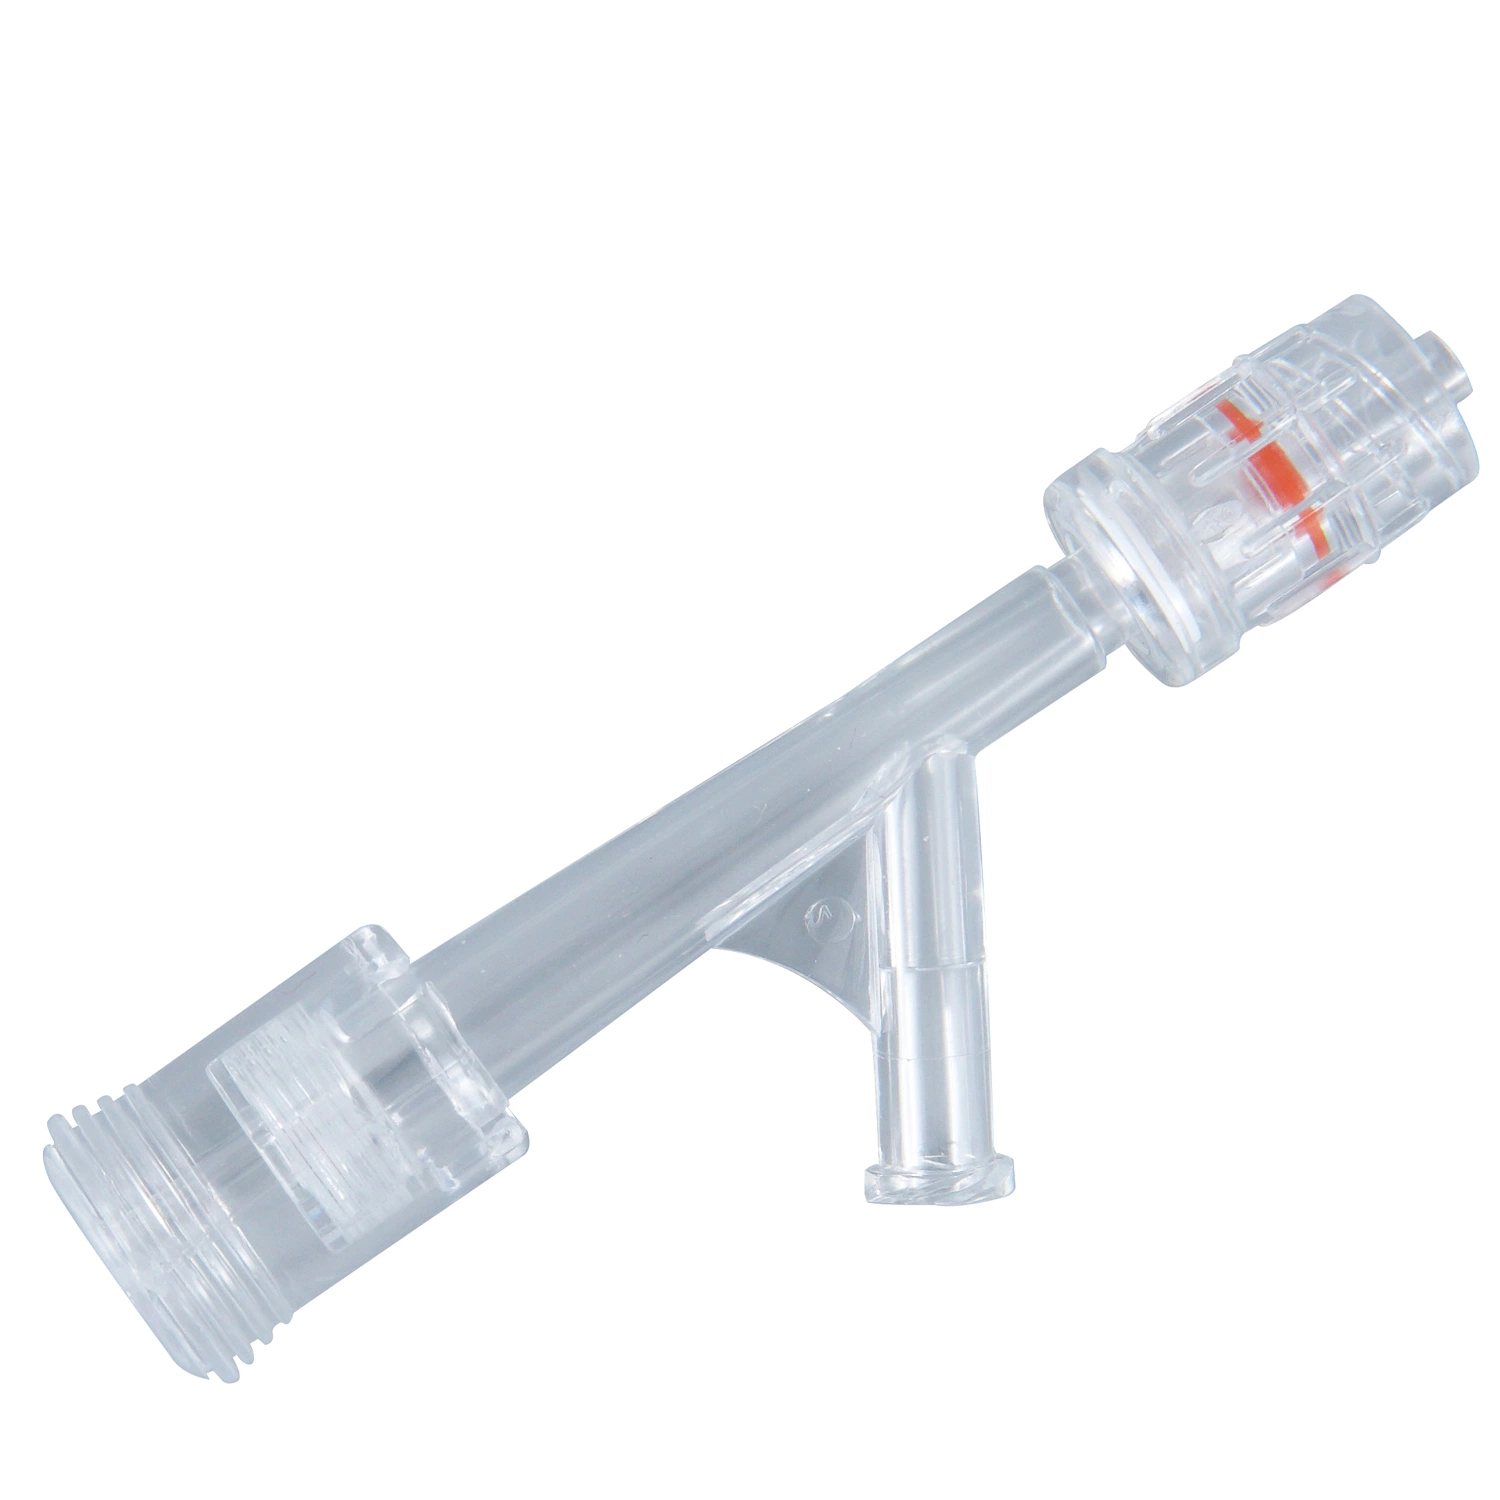 Ce Marked Surgical Supplies Hemostasis Y Valve Push Pull Type